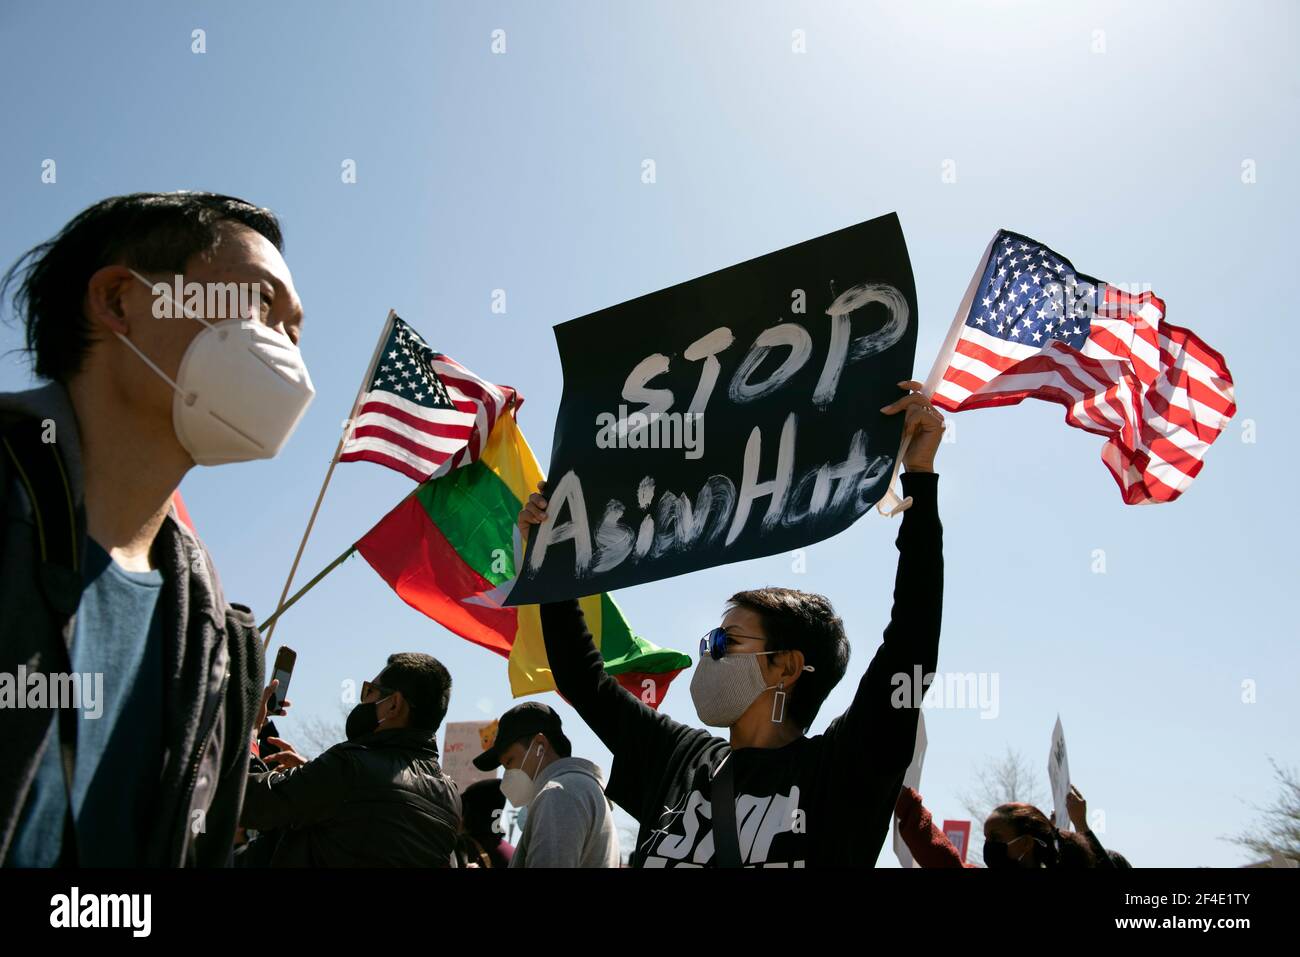 Atlanta, GA, USA. 20th Mar, 2021. Thousands from Asian American and Pacific Islander community and supporters gather outside state Capitol for rally and march through downtown, protesting surge in violence against their community and displaying anger over killing of eight Asian spa workers days earlier. Credit: Robin Rayne/ZUMA Wire/Alamy Live News Stock Photo